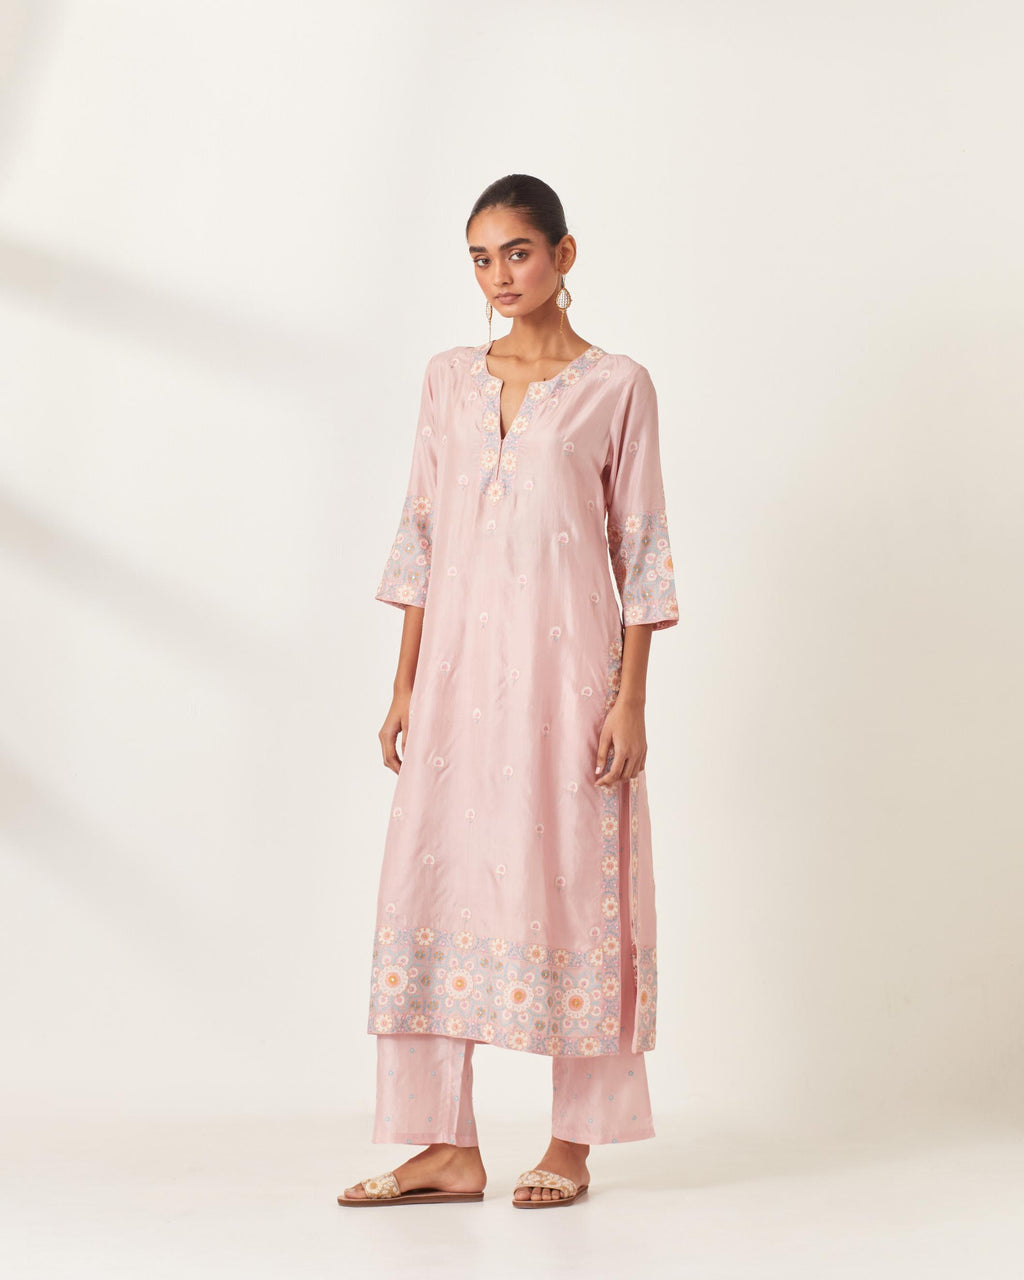 Pink silk kurta set with multi-colored bold appliqué, bootas at borders and aari threadwork, highlighted with sequins.